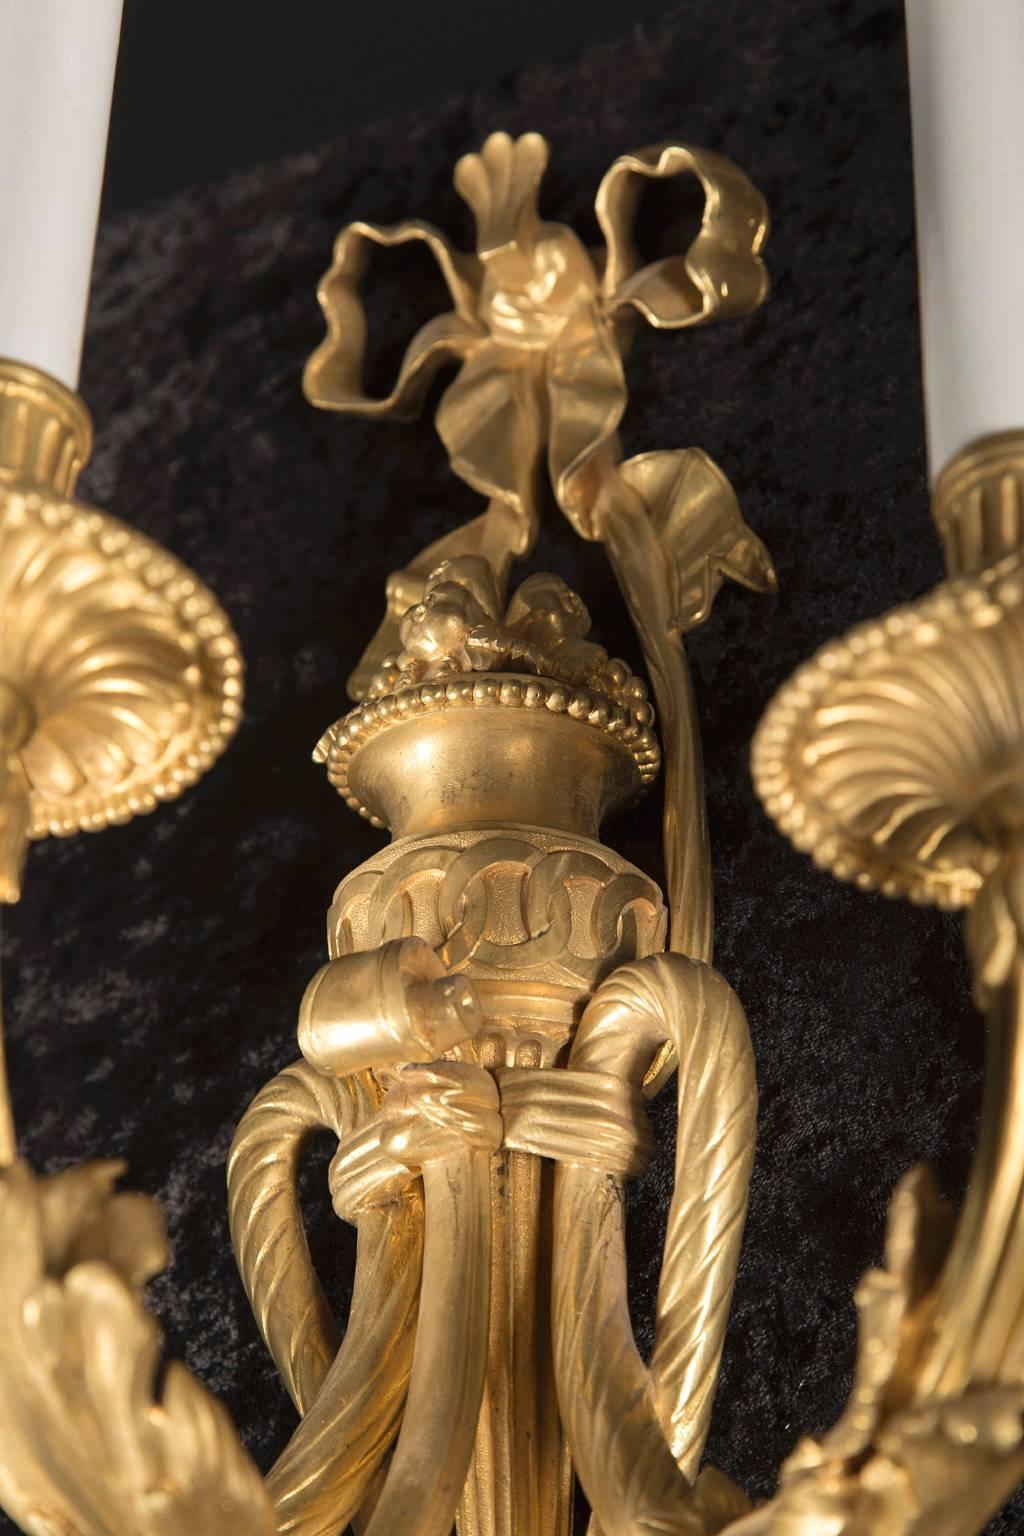 This gorgeous pair of 19th century Louis XVI sconces are made of beautiful, finely chiseled bronze d’ore. The pair has details in plenty; note the classic Louis XVI bow at top, the three branch arms attached to the center with a knotted fabric